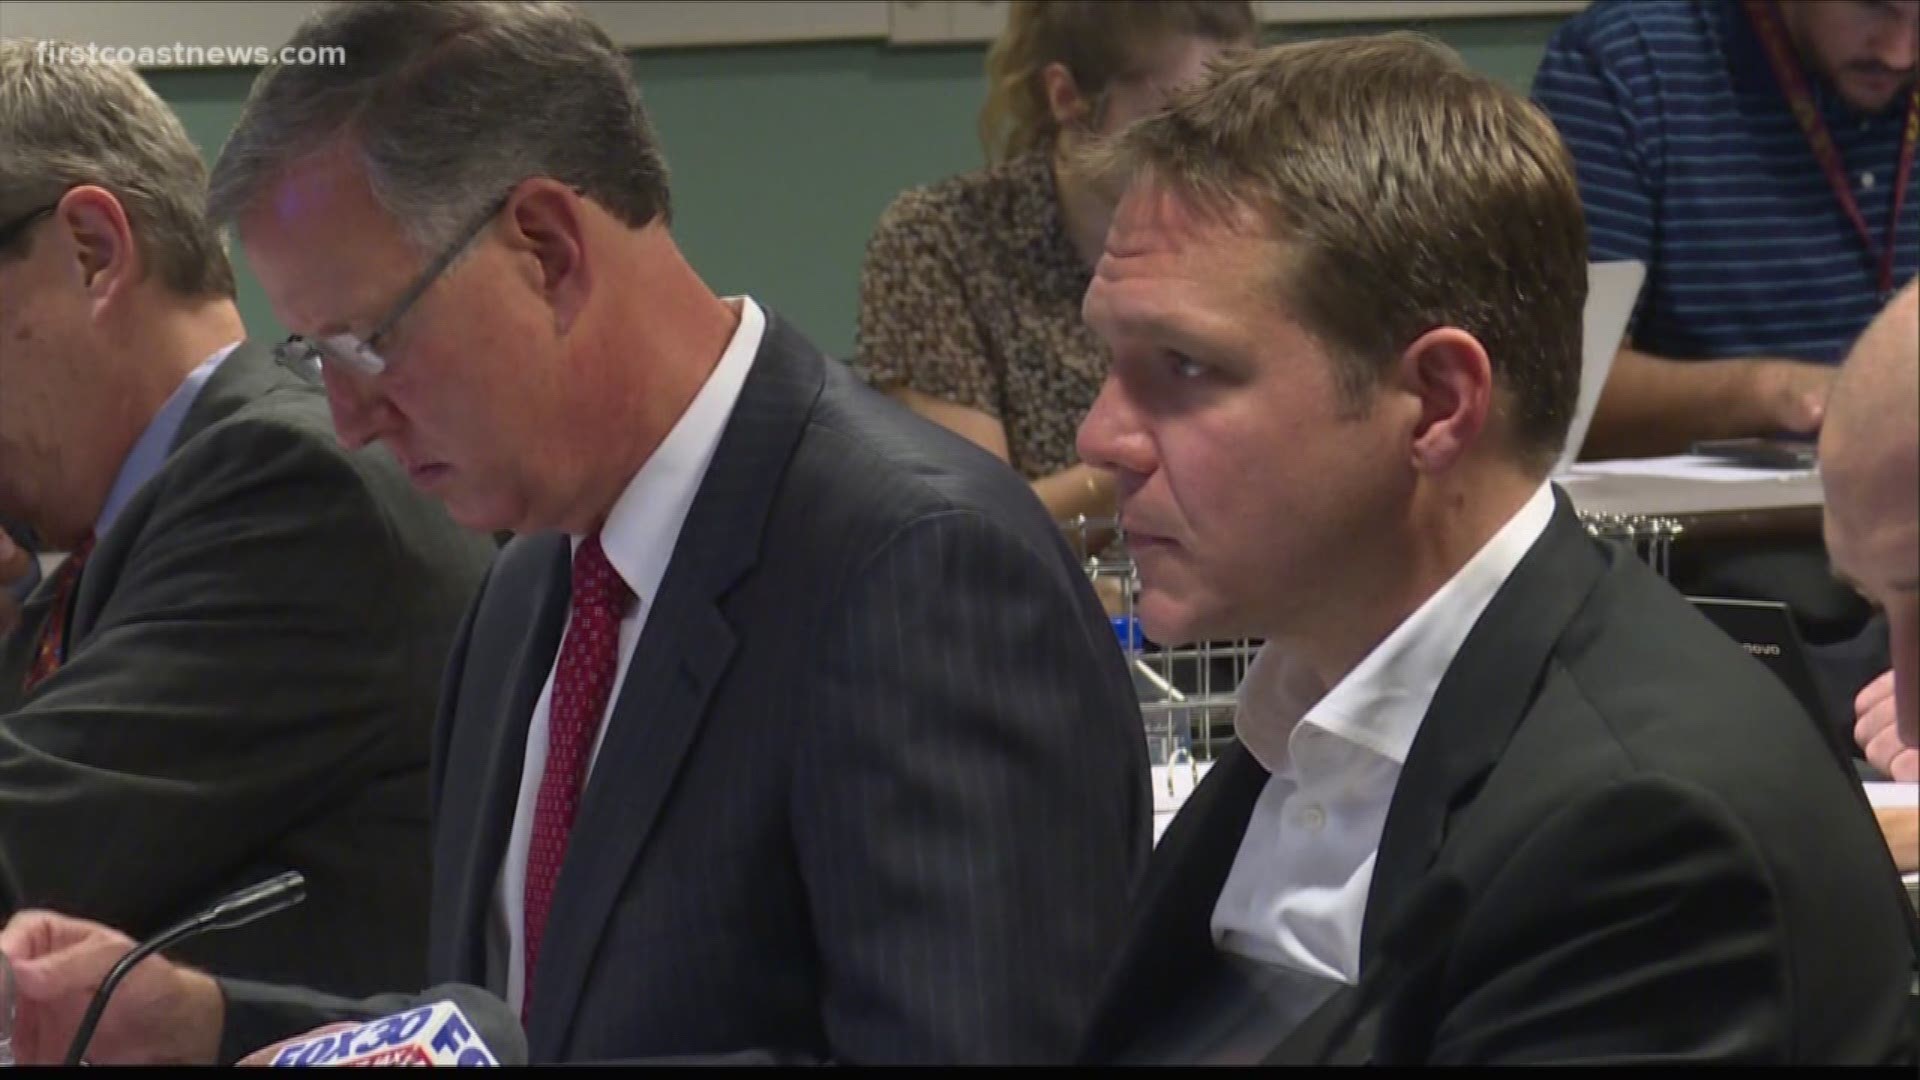 Mayor Lenny Curry announced the board members' resignations, which are effective at the end of February.